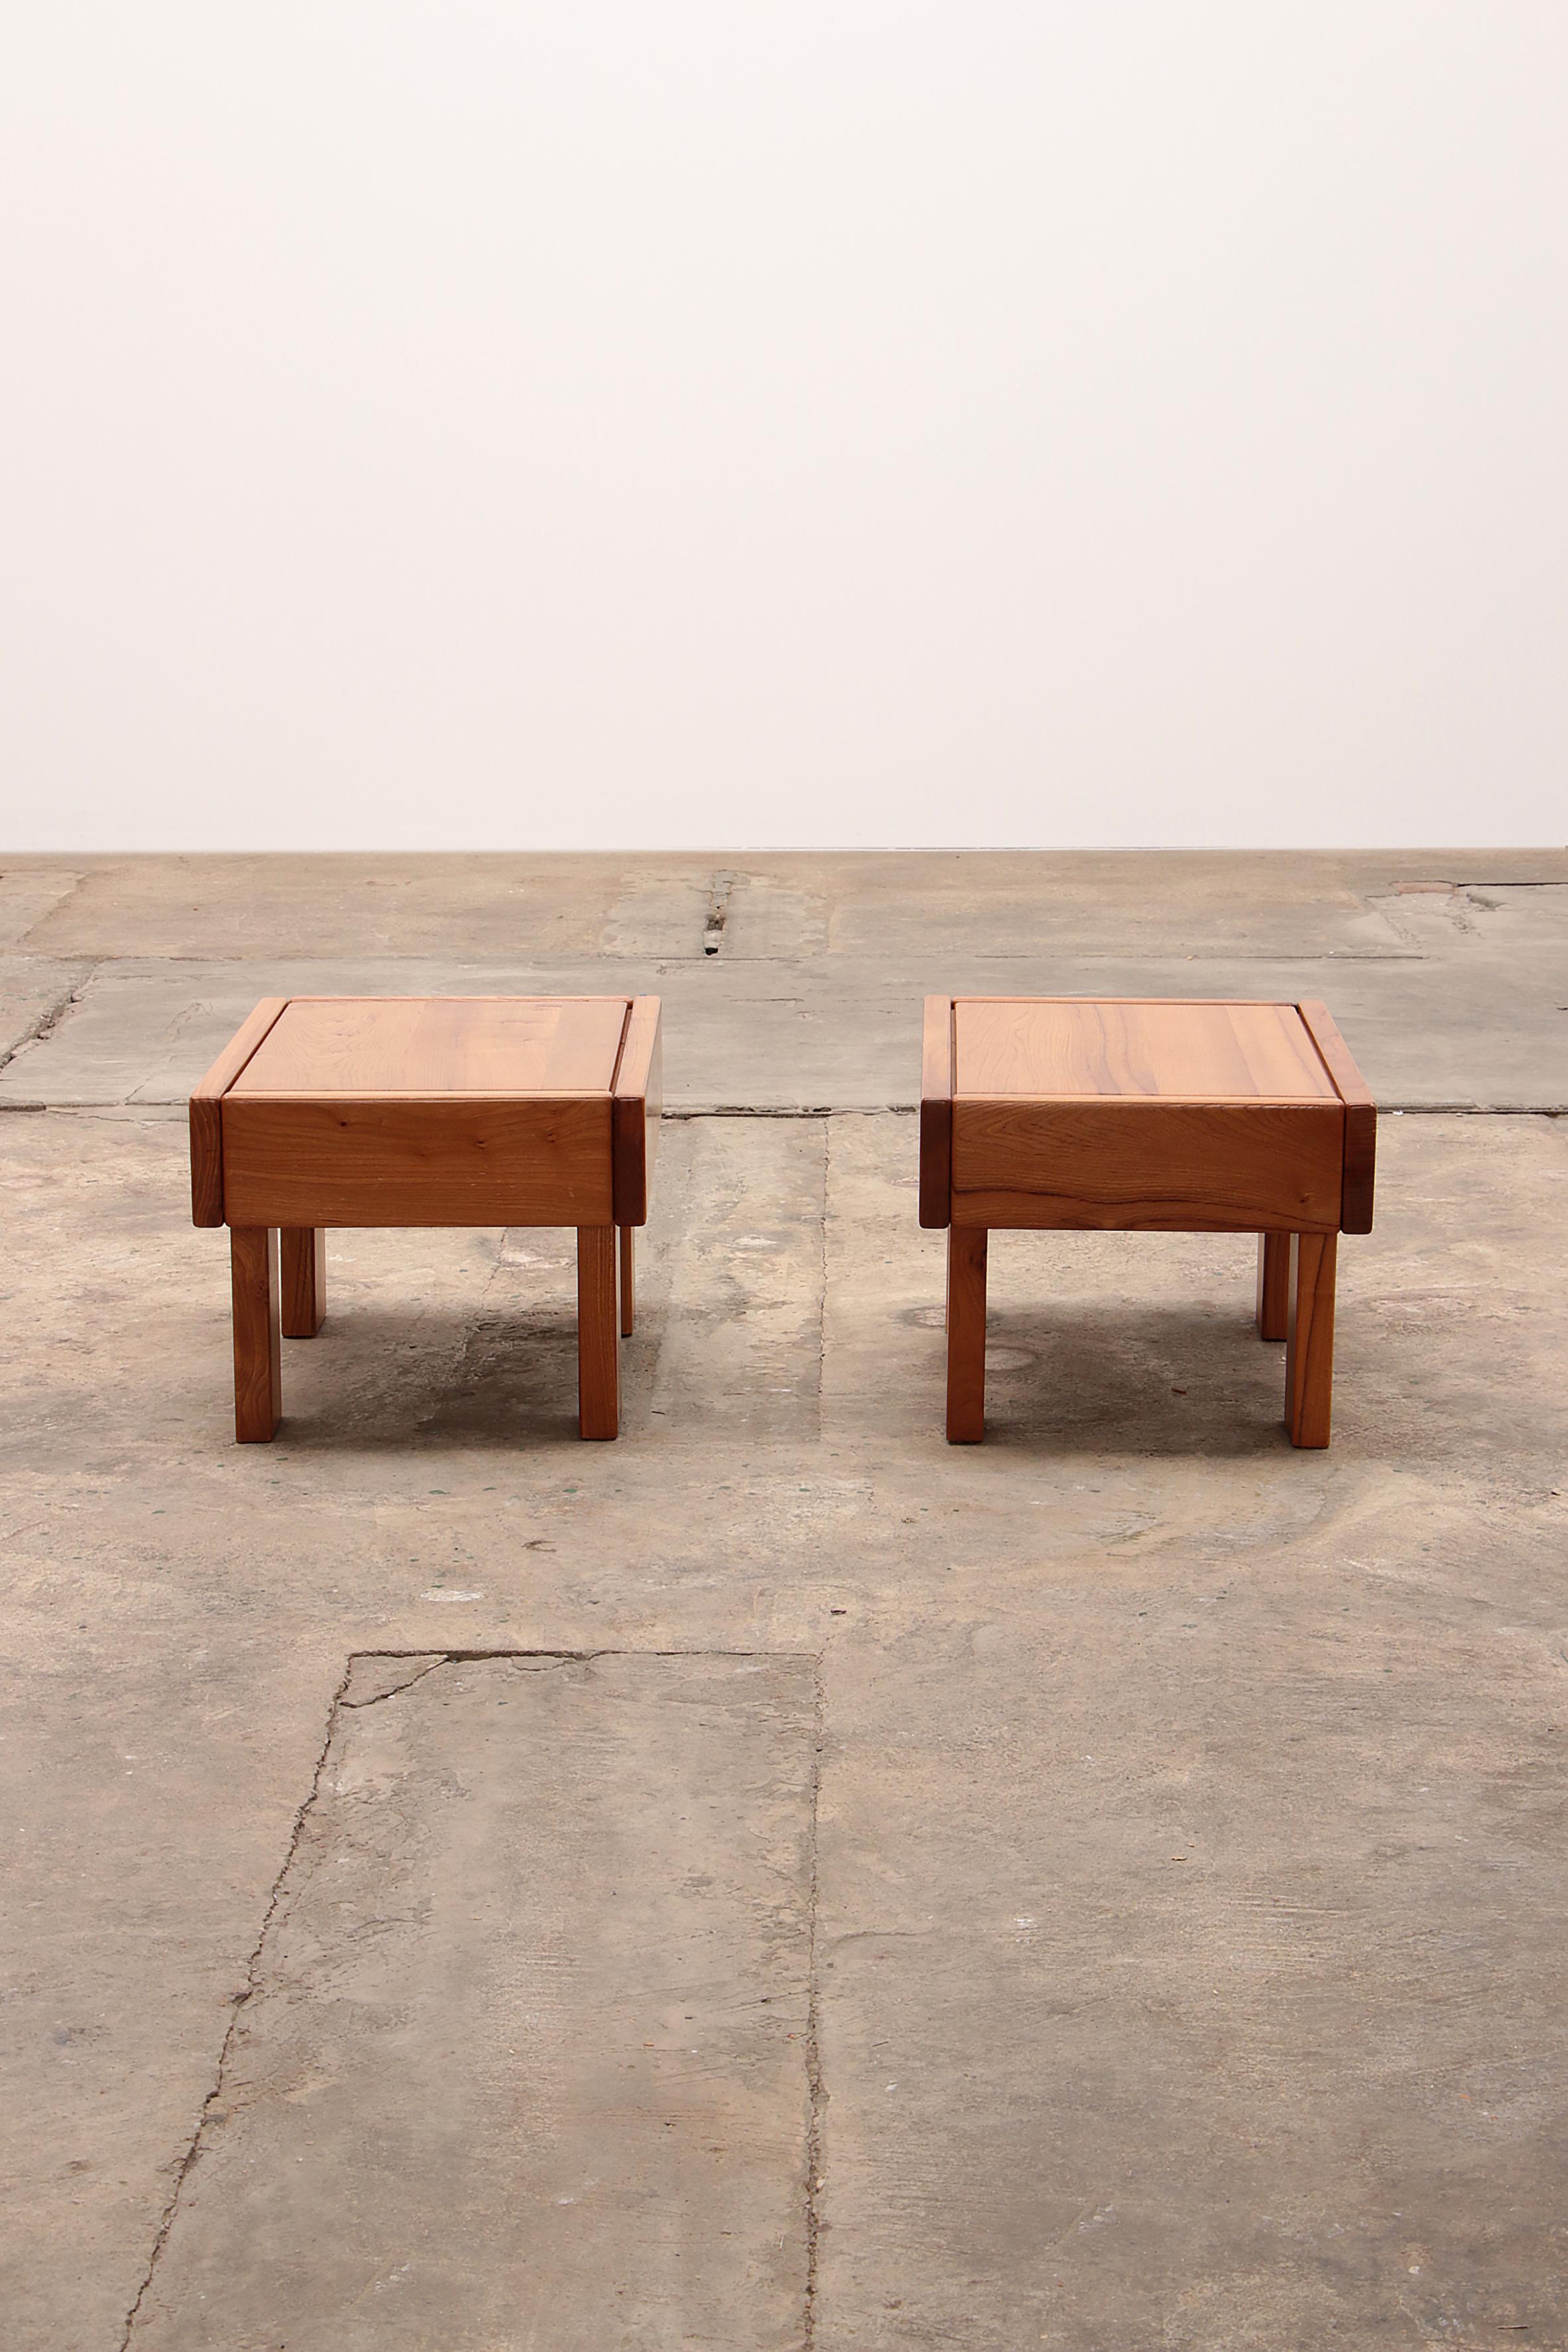 French Maison Regain Set of Elm Wood Tables from the 1970s, France